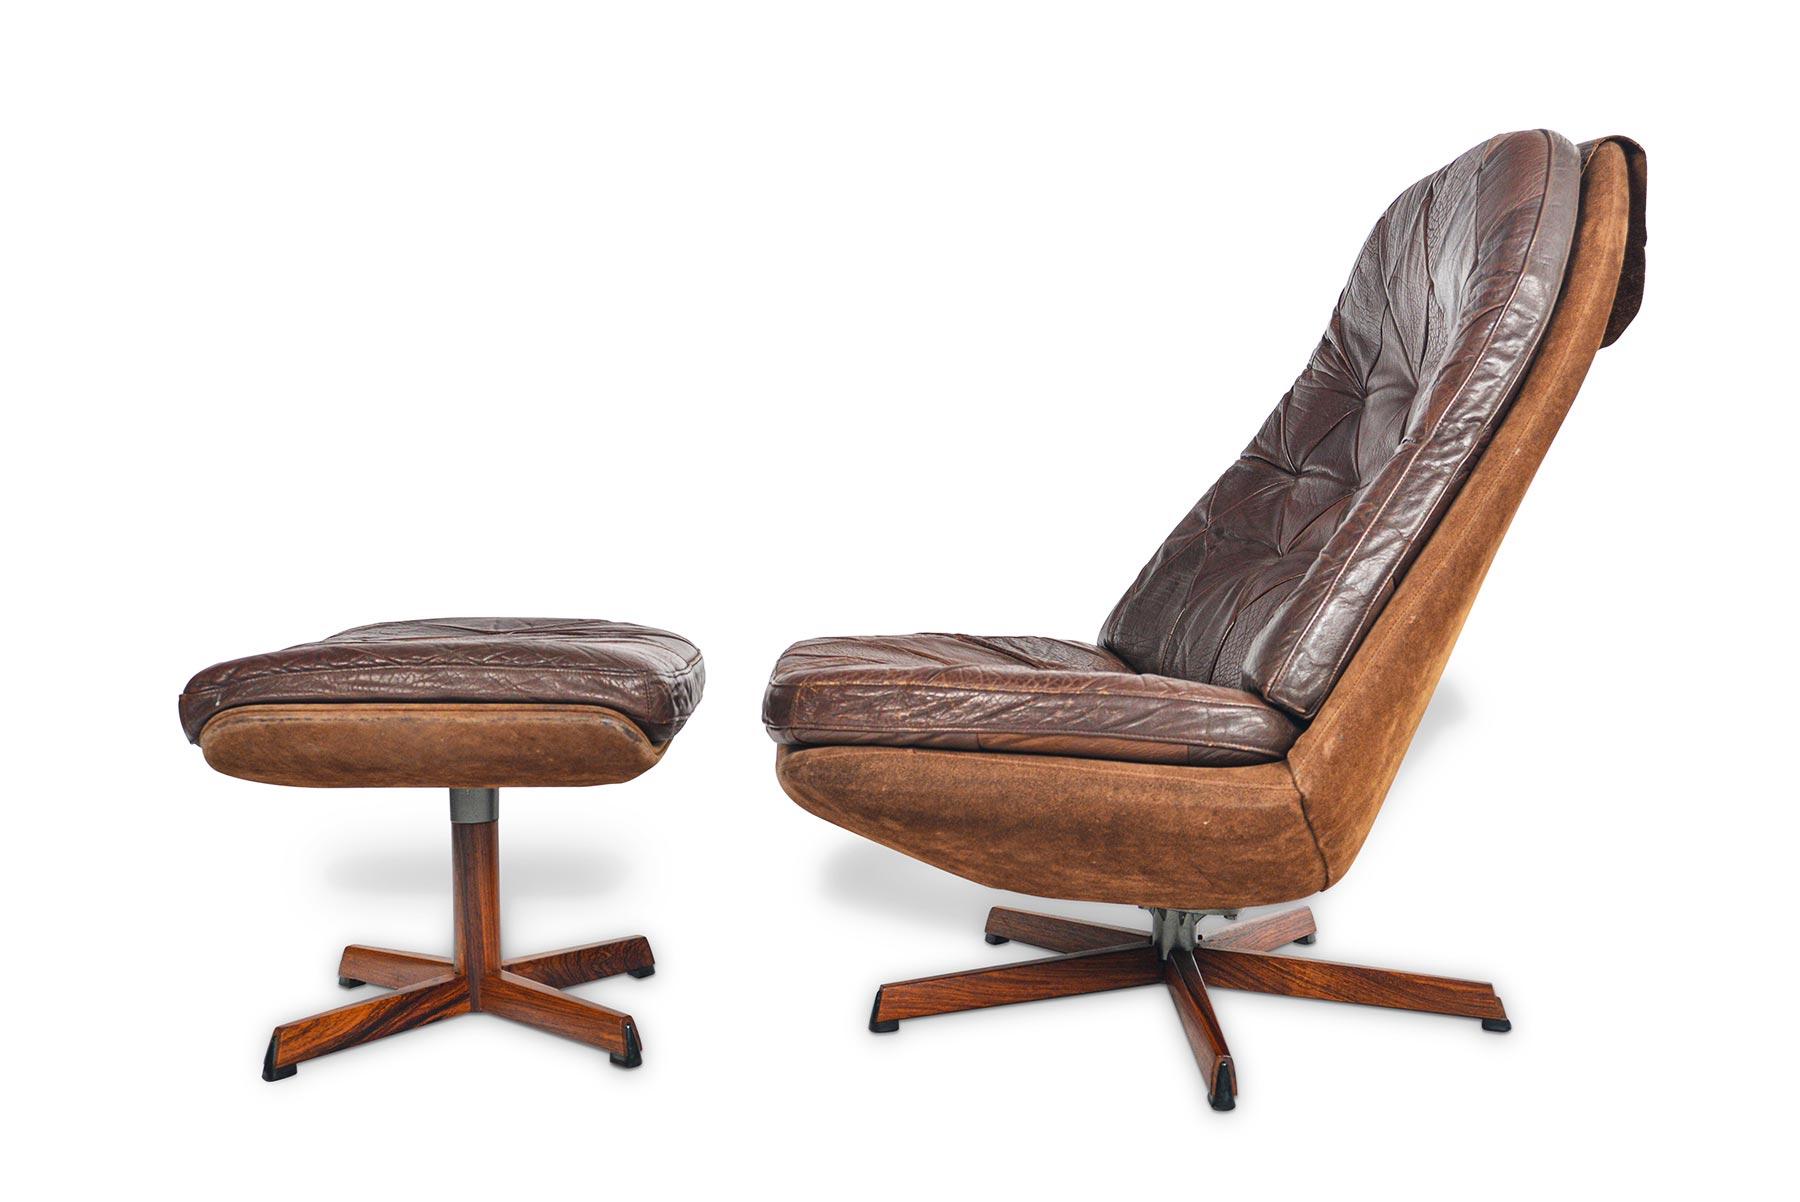 This phenomenal brown leather swivel chair and ottoman were designed by Madsen and Schubell as model 68 in the late sixties. The large armless seat is covered in suede and holds a single, harlequin tufted brown leather cushion. Both chair and